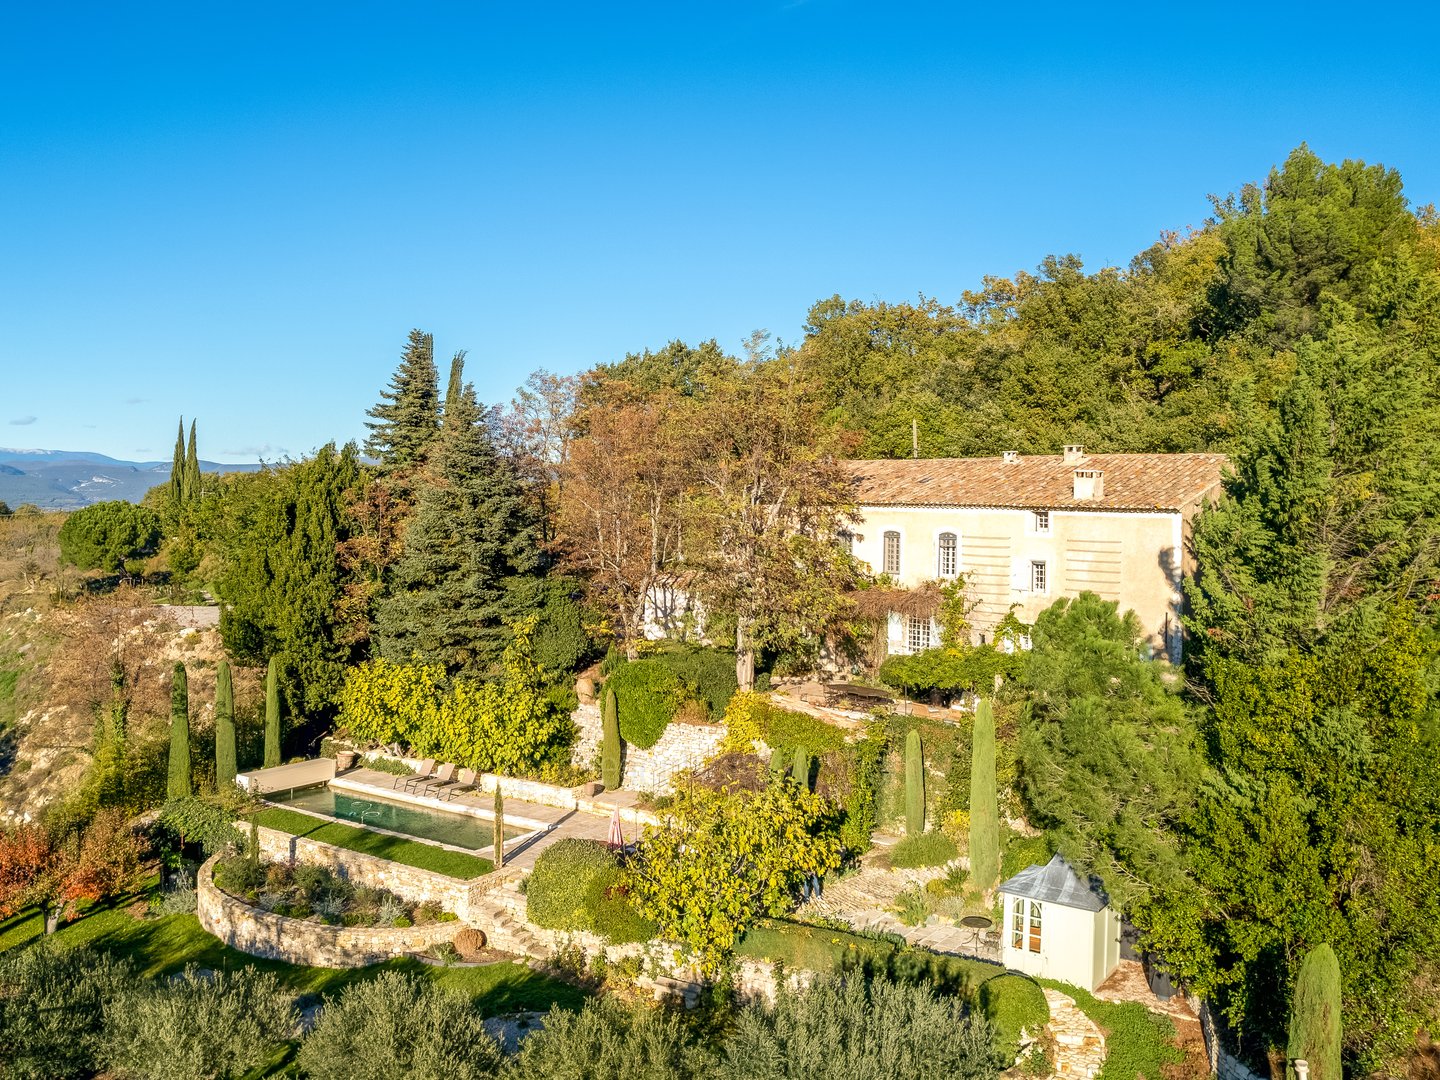 18th century Bastide with views of Luberon for sale - Bonnieux - 59